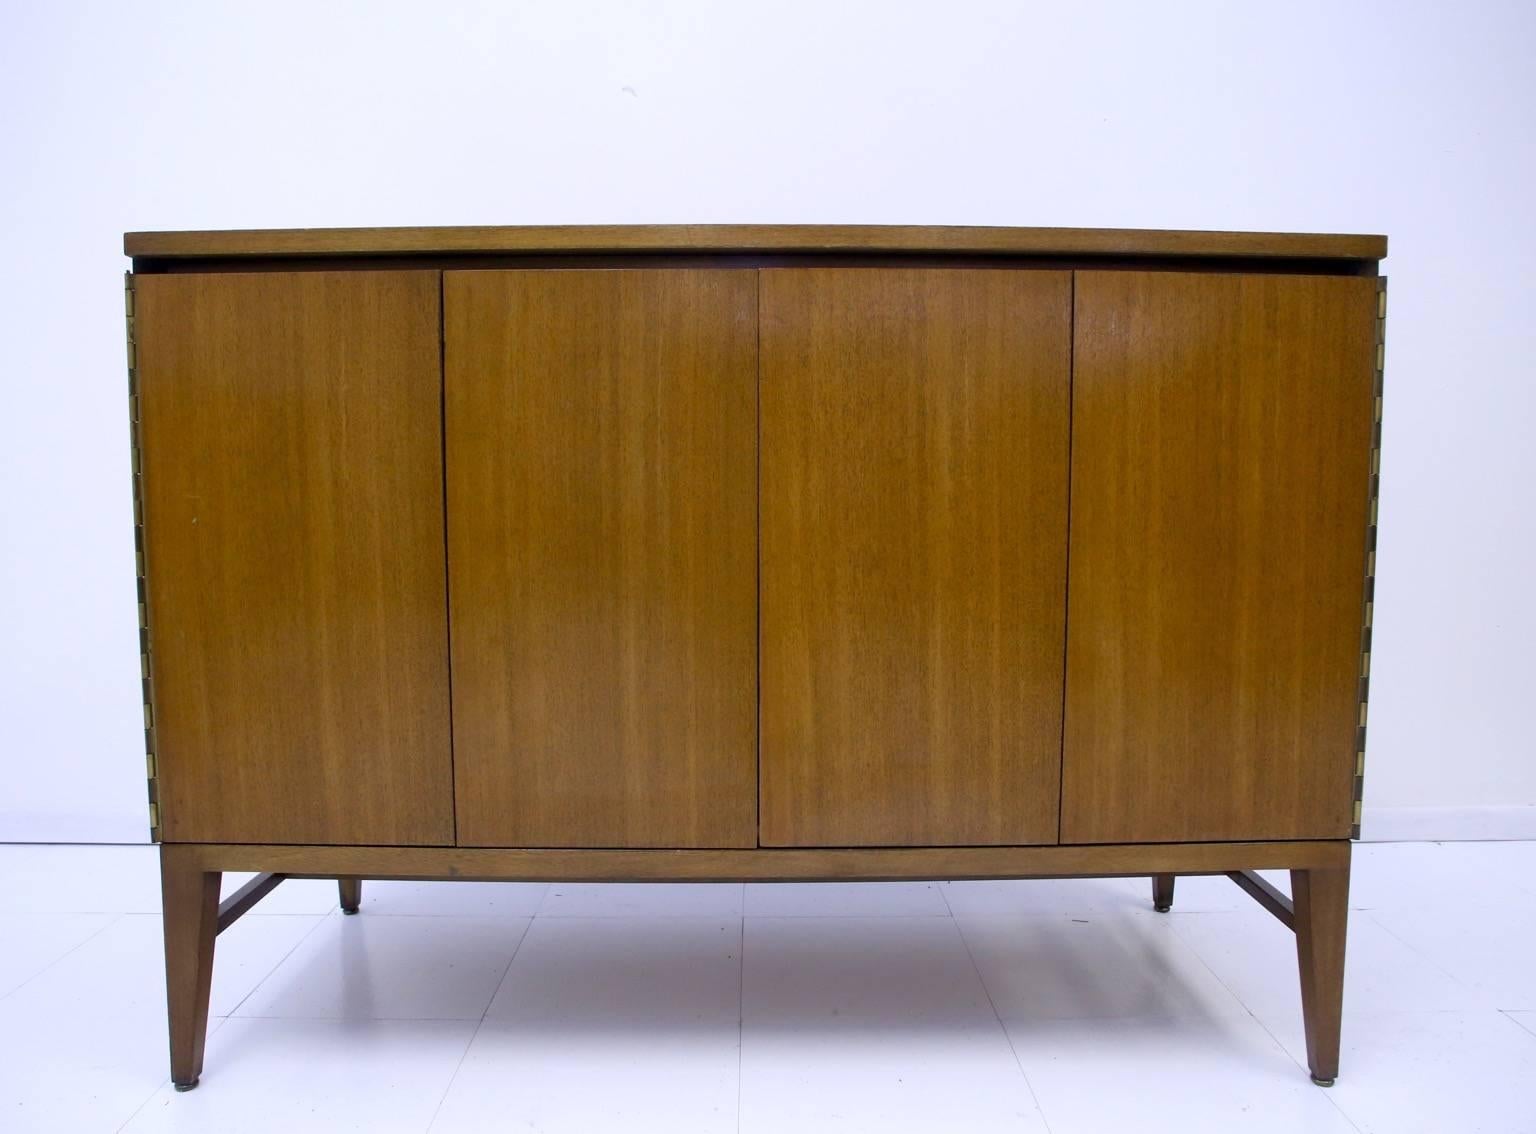 Paul McCobb for Calvin sideboard credenzas. Two available. Price is each. One credenza opens to reveal four drawers and a small shelving area. The other opens for shelving.